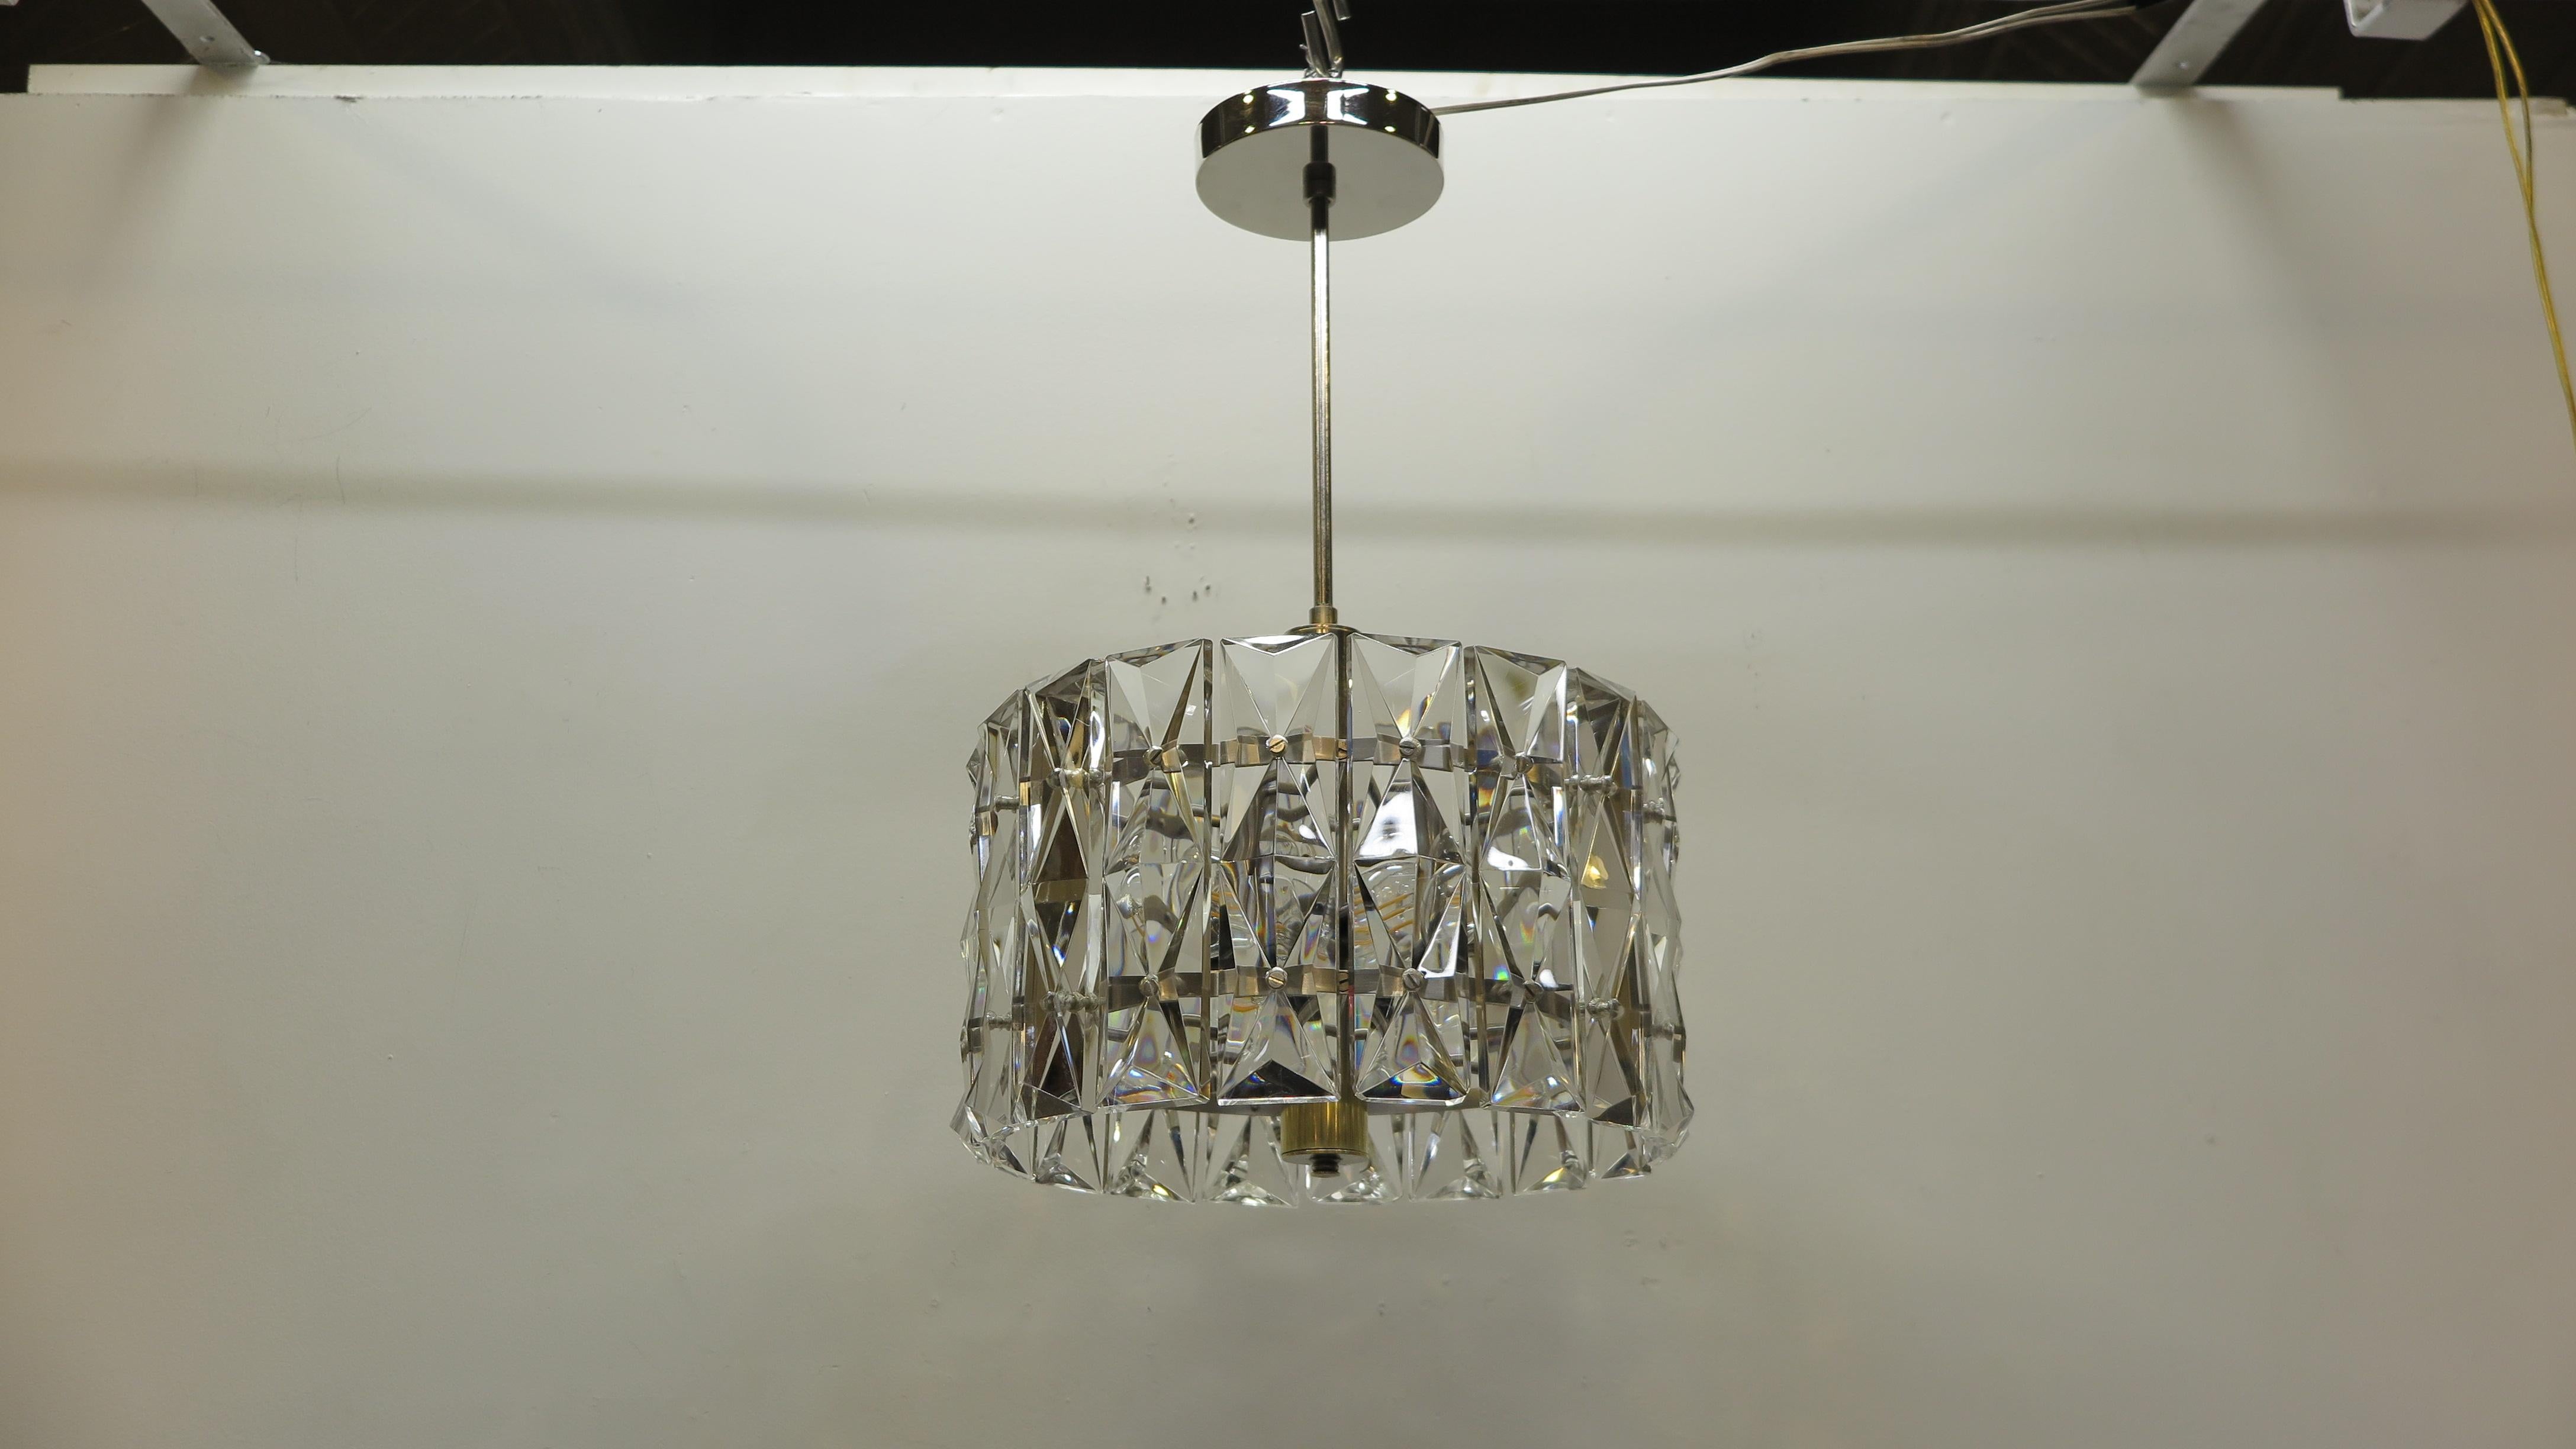 Midcentury pendant light of prism faceted cut crystal glass. Midcentury Kinkeldey pendant light high quality having thick facet cut prism crystal glass chards suspended on stainless steel circular cage with a nickel cylinder shaft. Light capacity